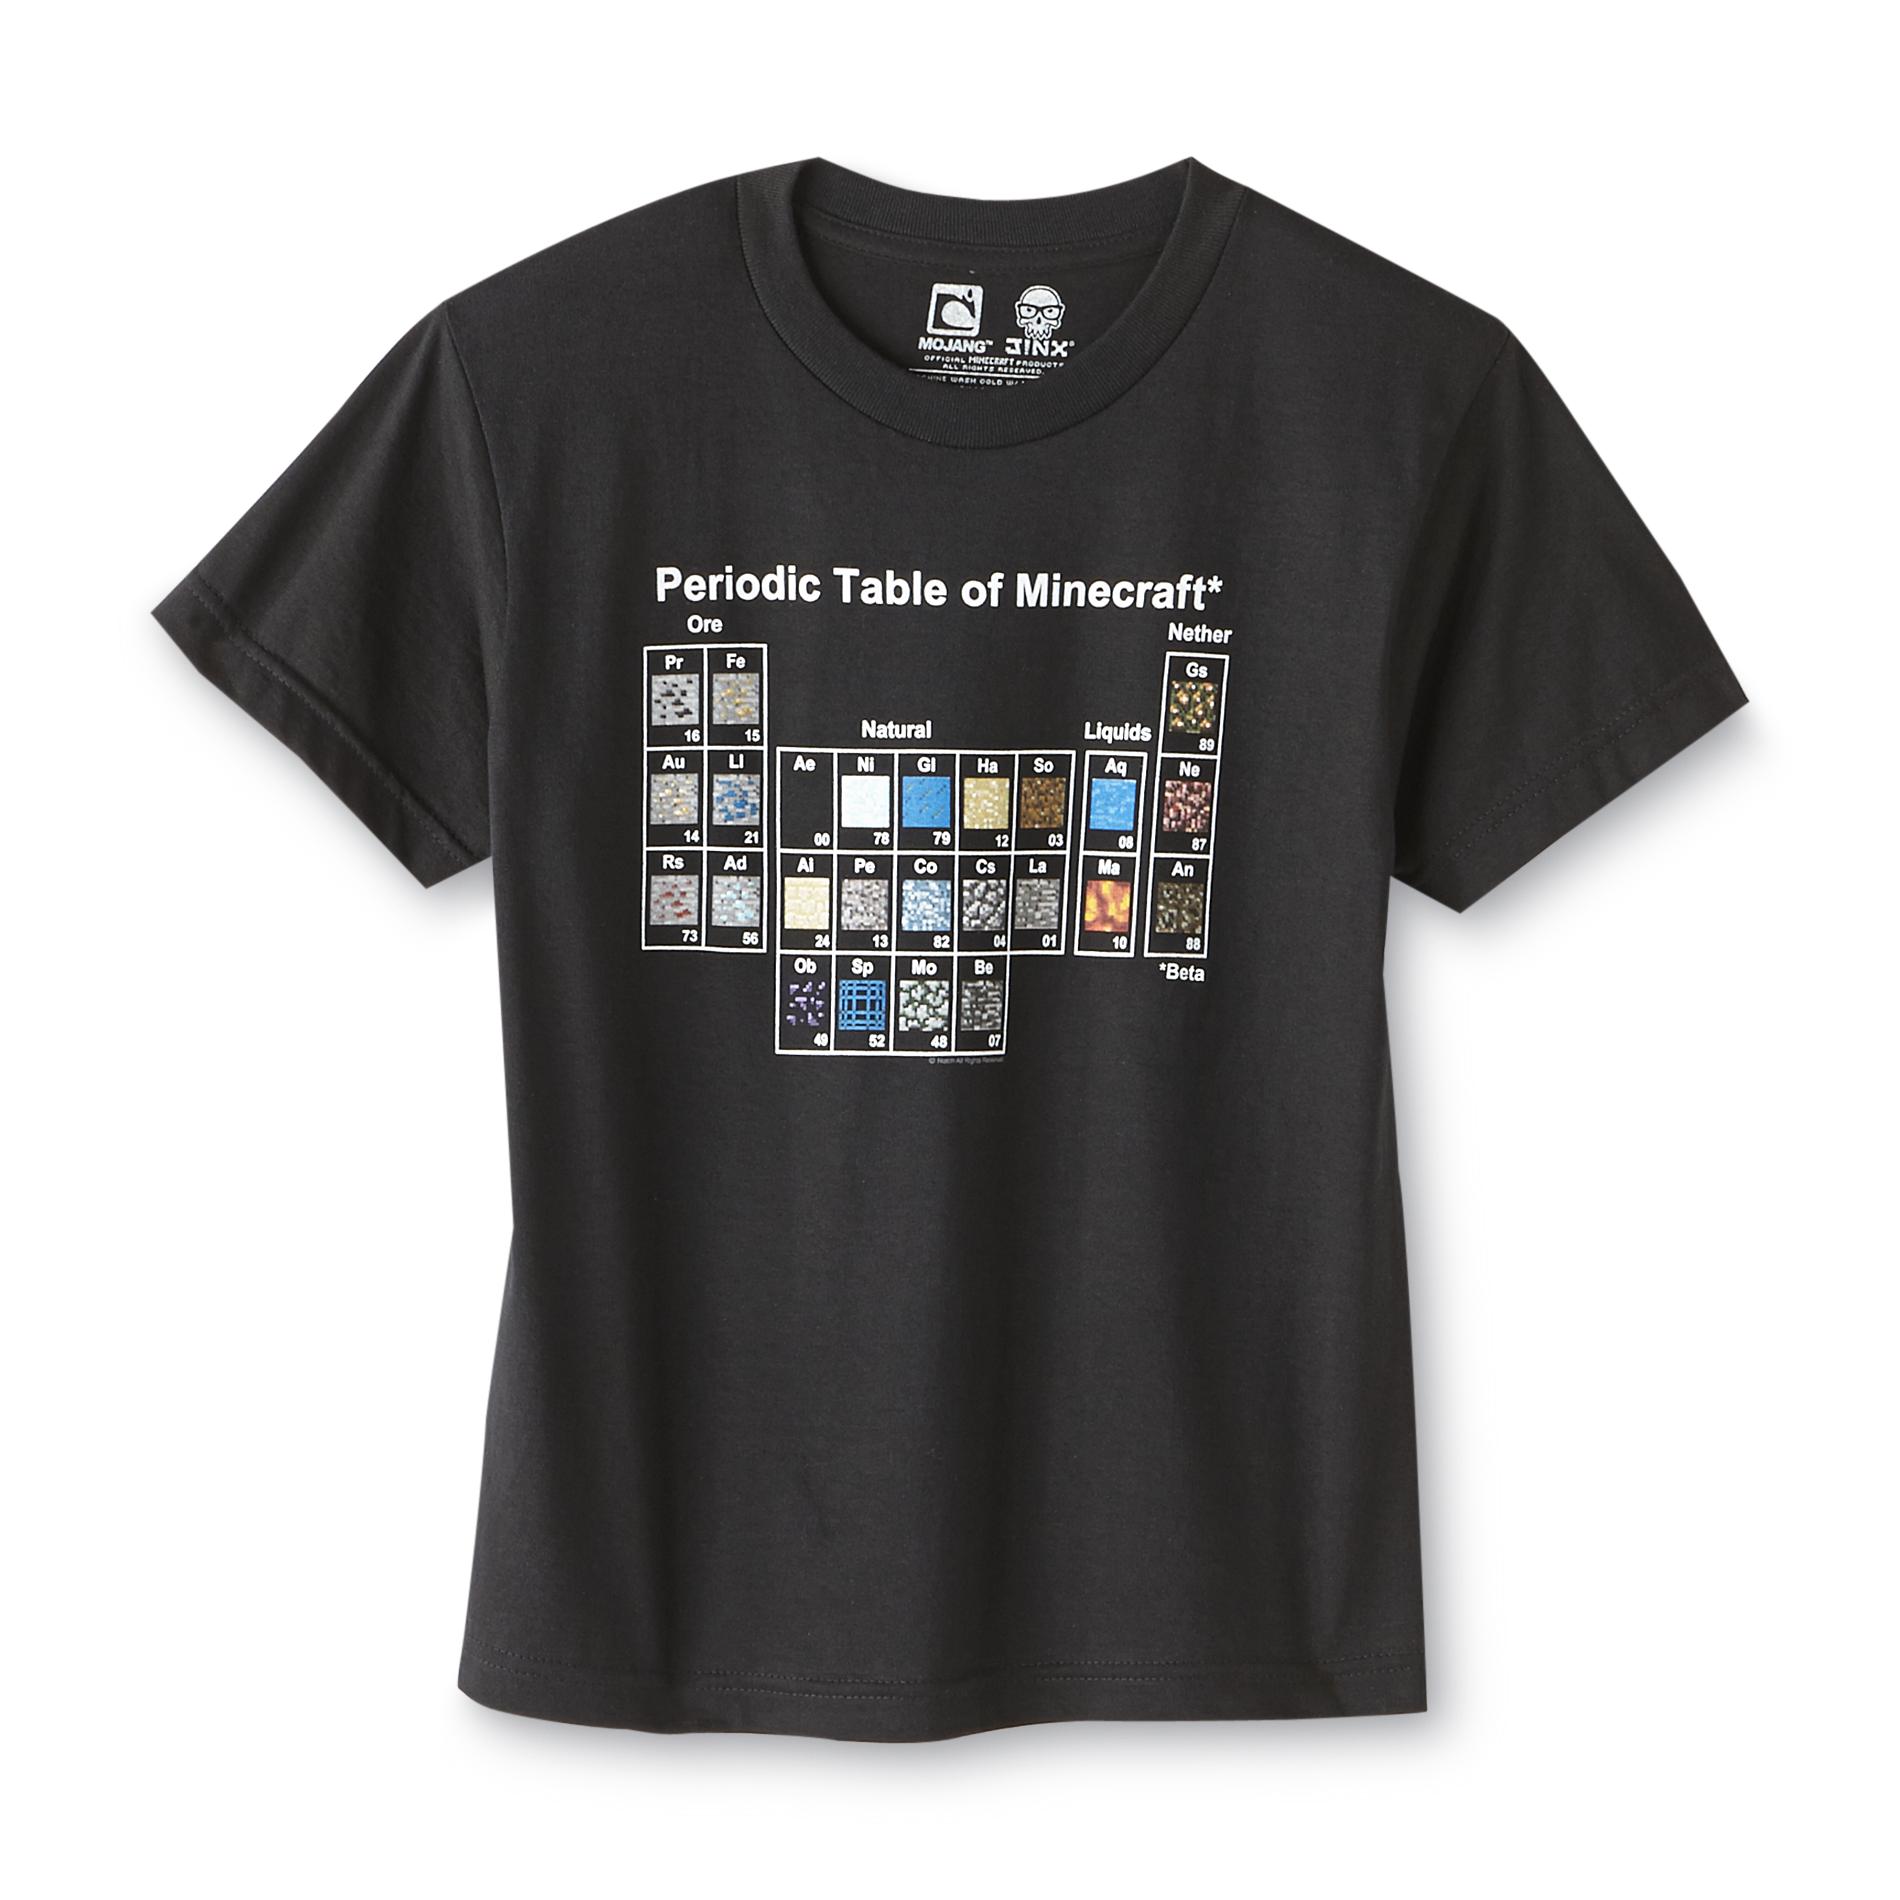 Boy's Graphic T-Shirt - Minecraft Periodic Table